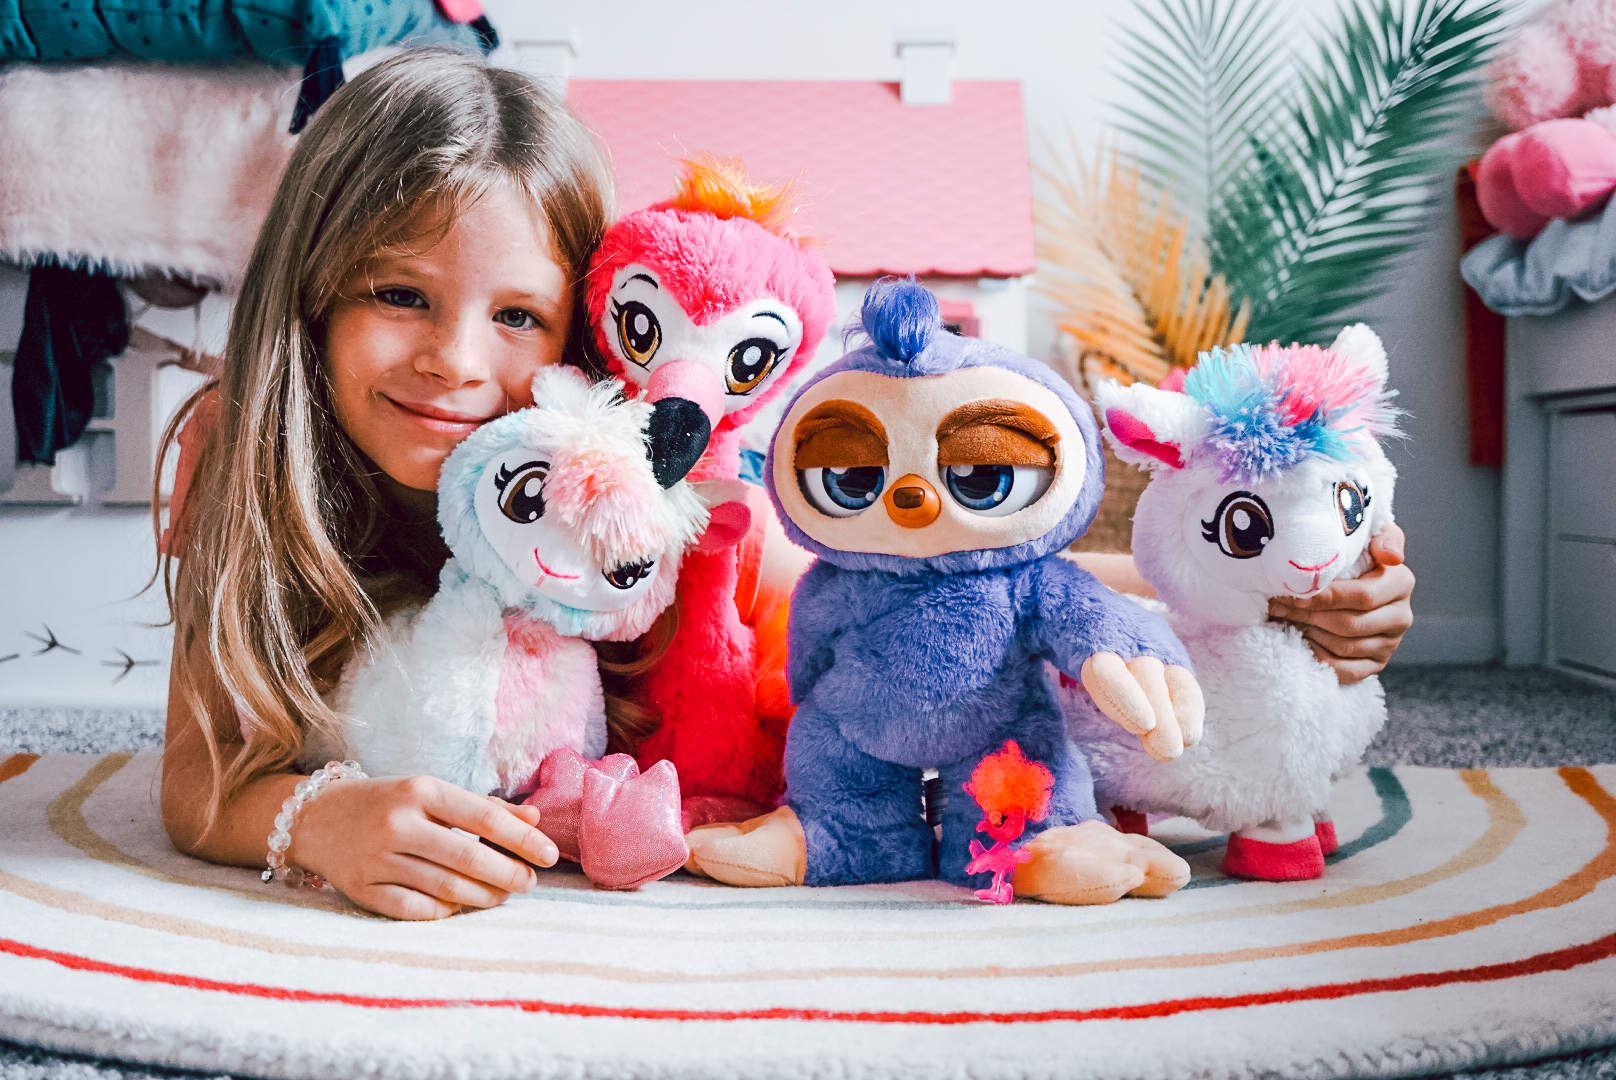 The best 5 toys for kids for Christmas 2020